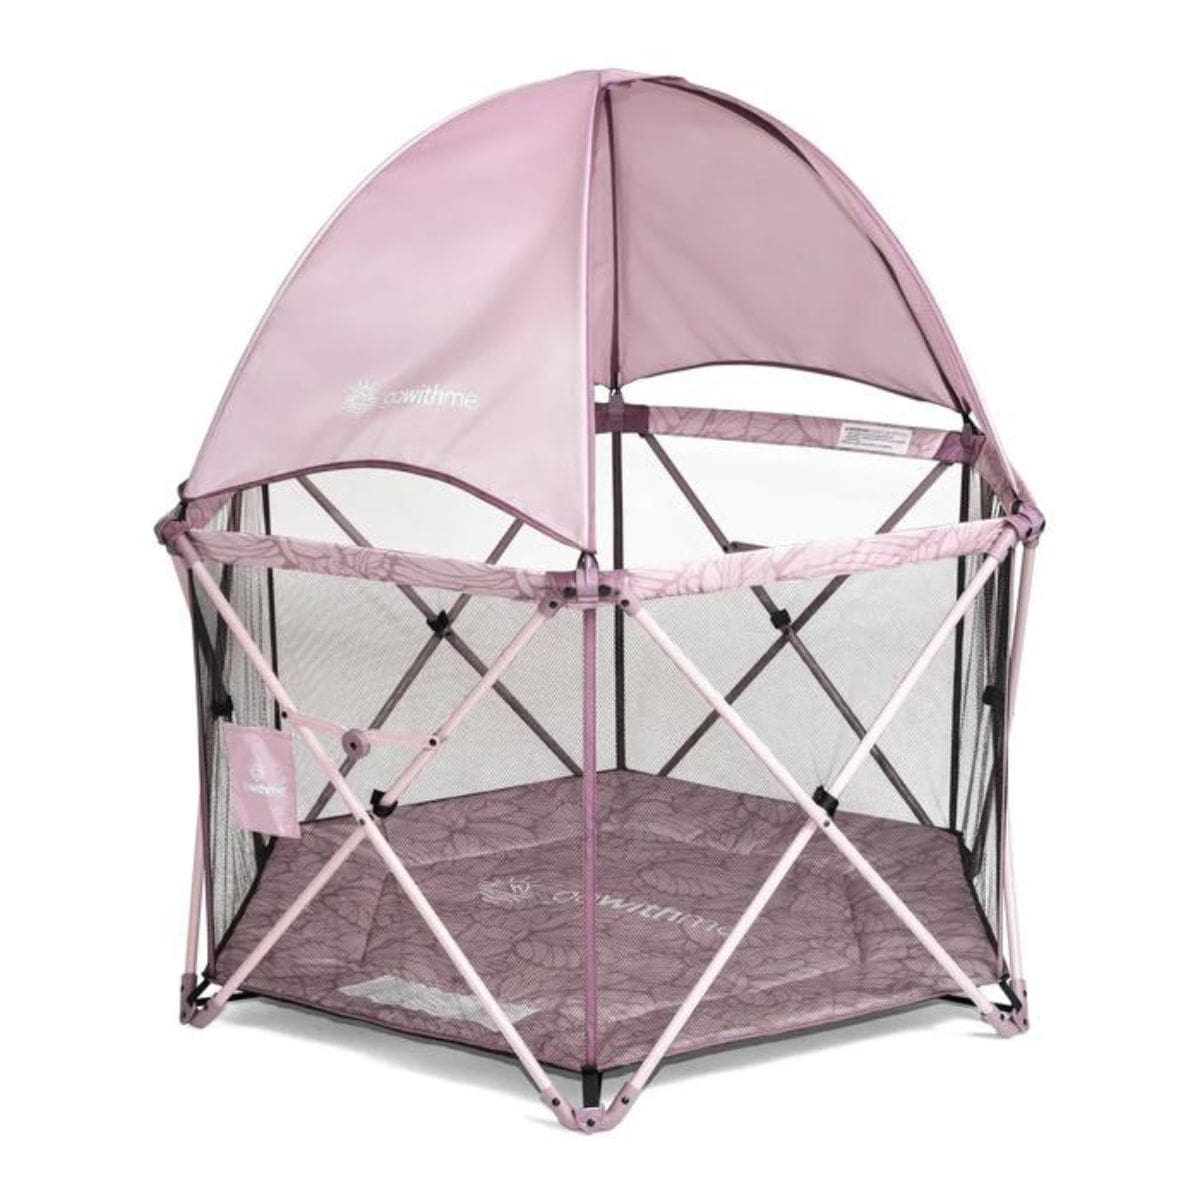 Go With Me Eclipse - Deluxe Portable Playard with Canopy & Padded Floor, 819956001579 - ANB Baby